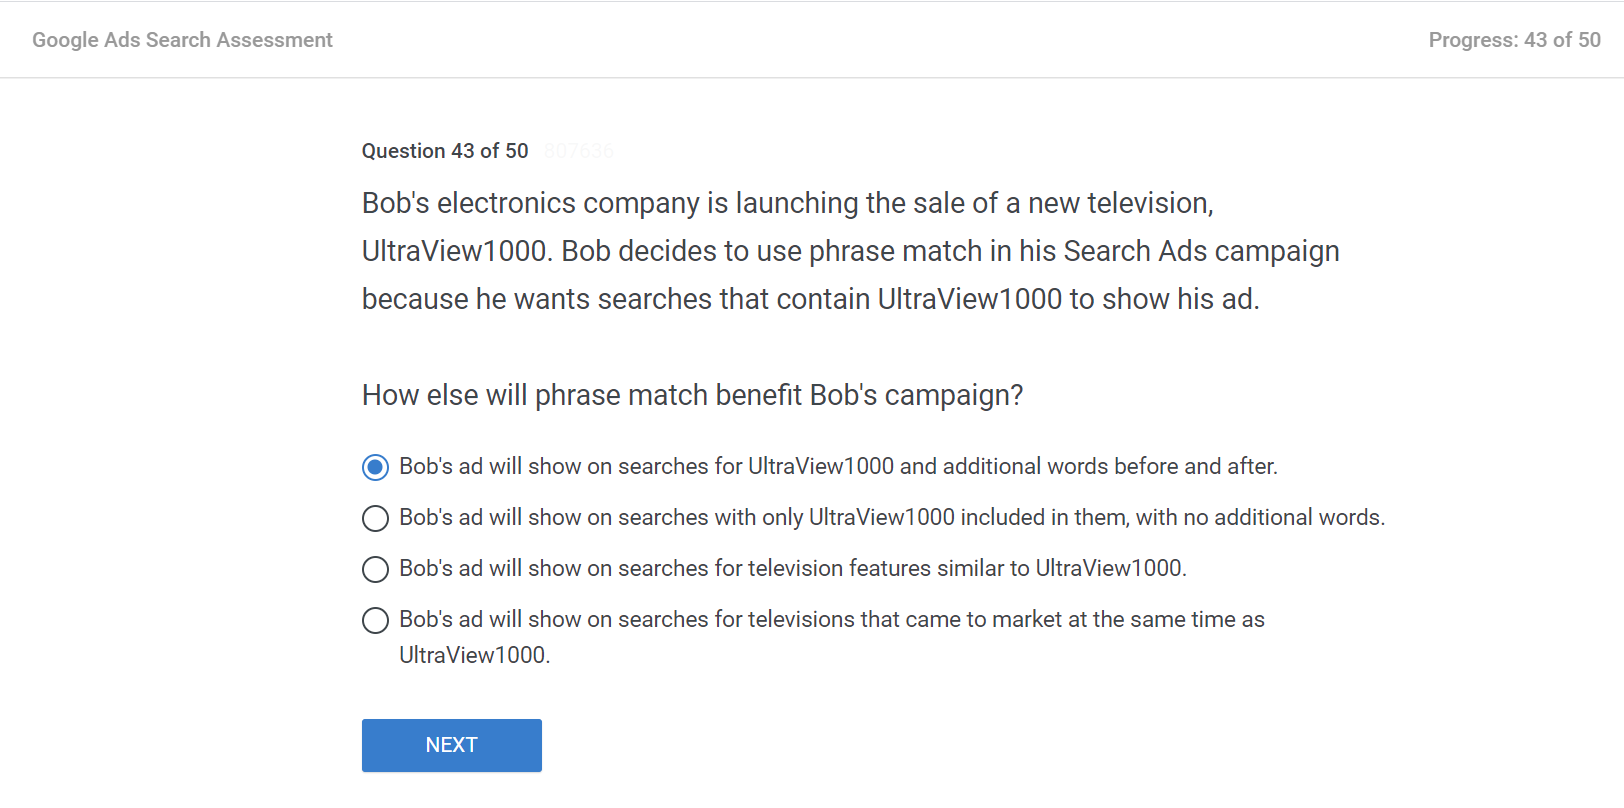 Bob's electronics company is launching the sale of a new television, UltraView1000. Bob decides to use phrase match in his Search Ads campaign because he wants searches that contain UltraView1000 to show his ad. 